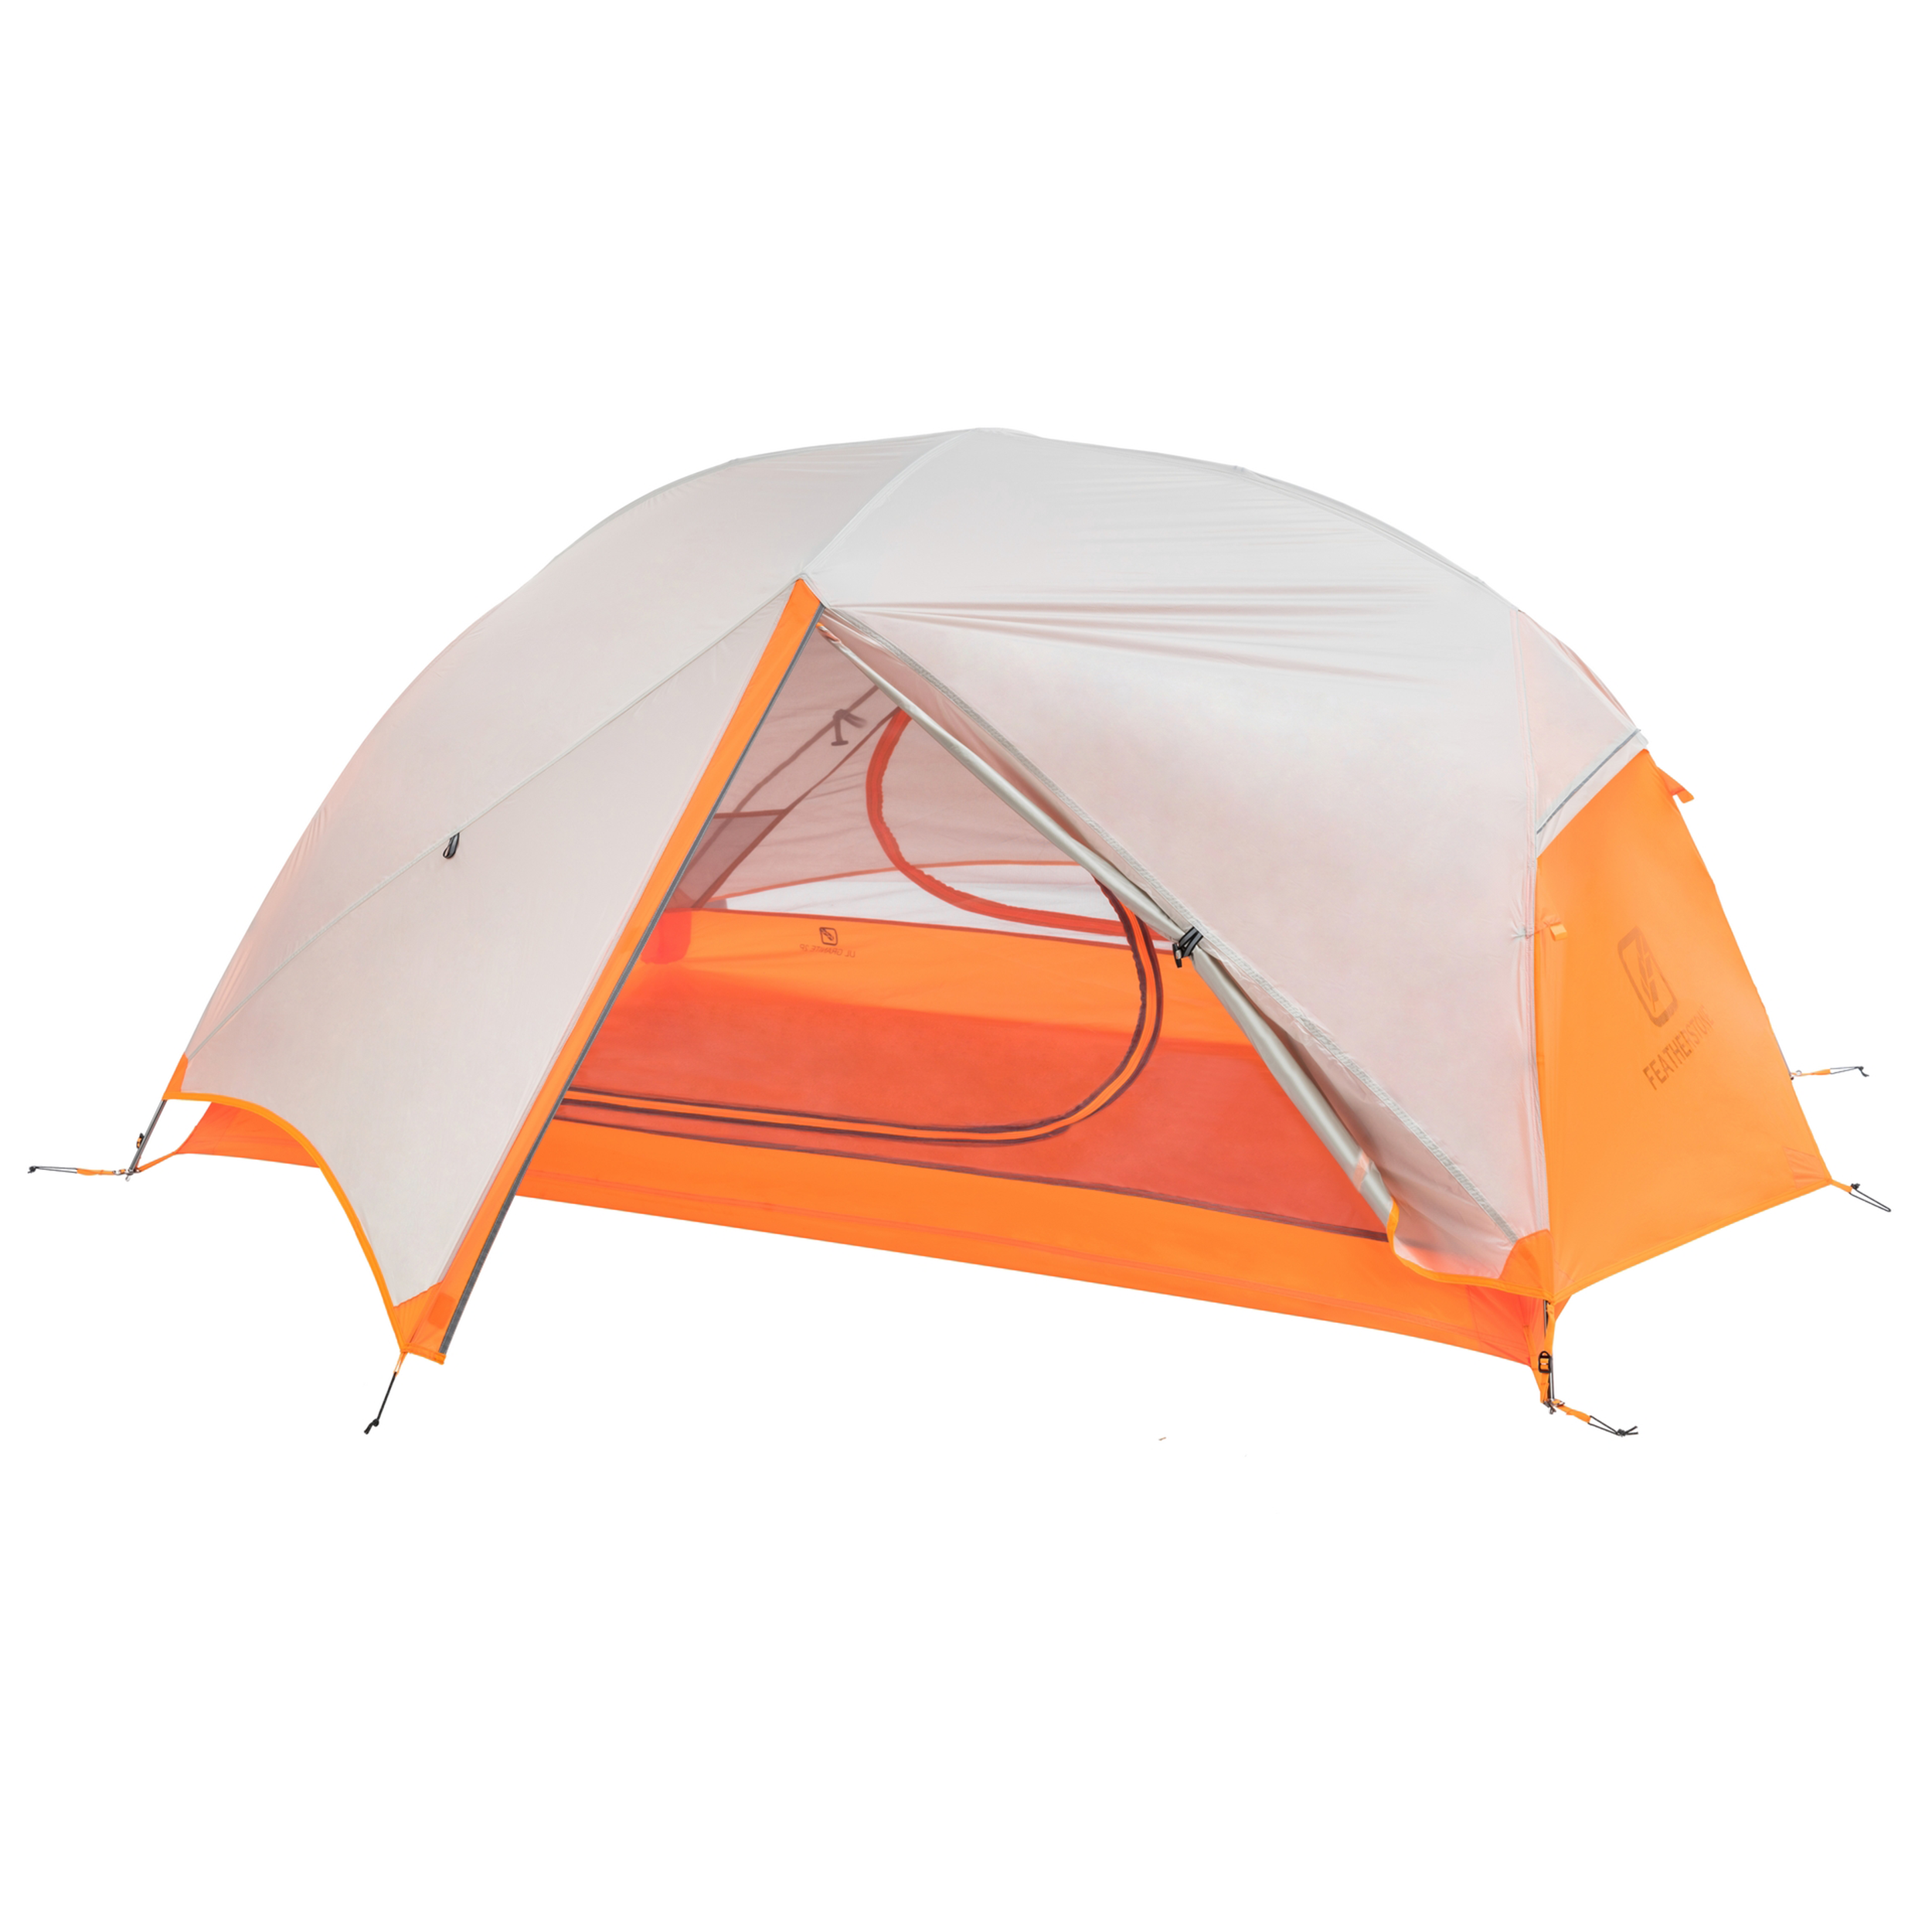 Featherstone Outdoor UL Granite 2-Person Backpacking Tent